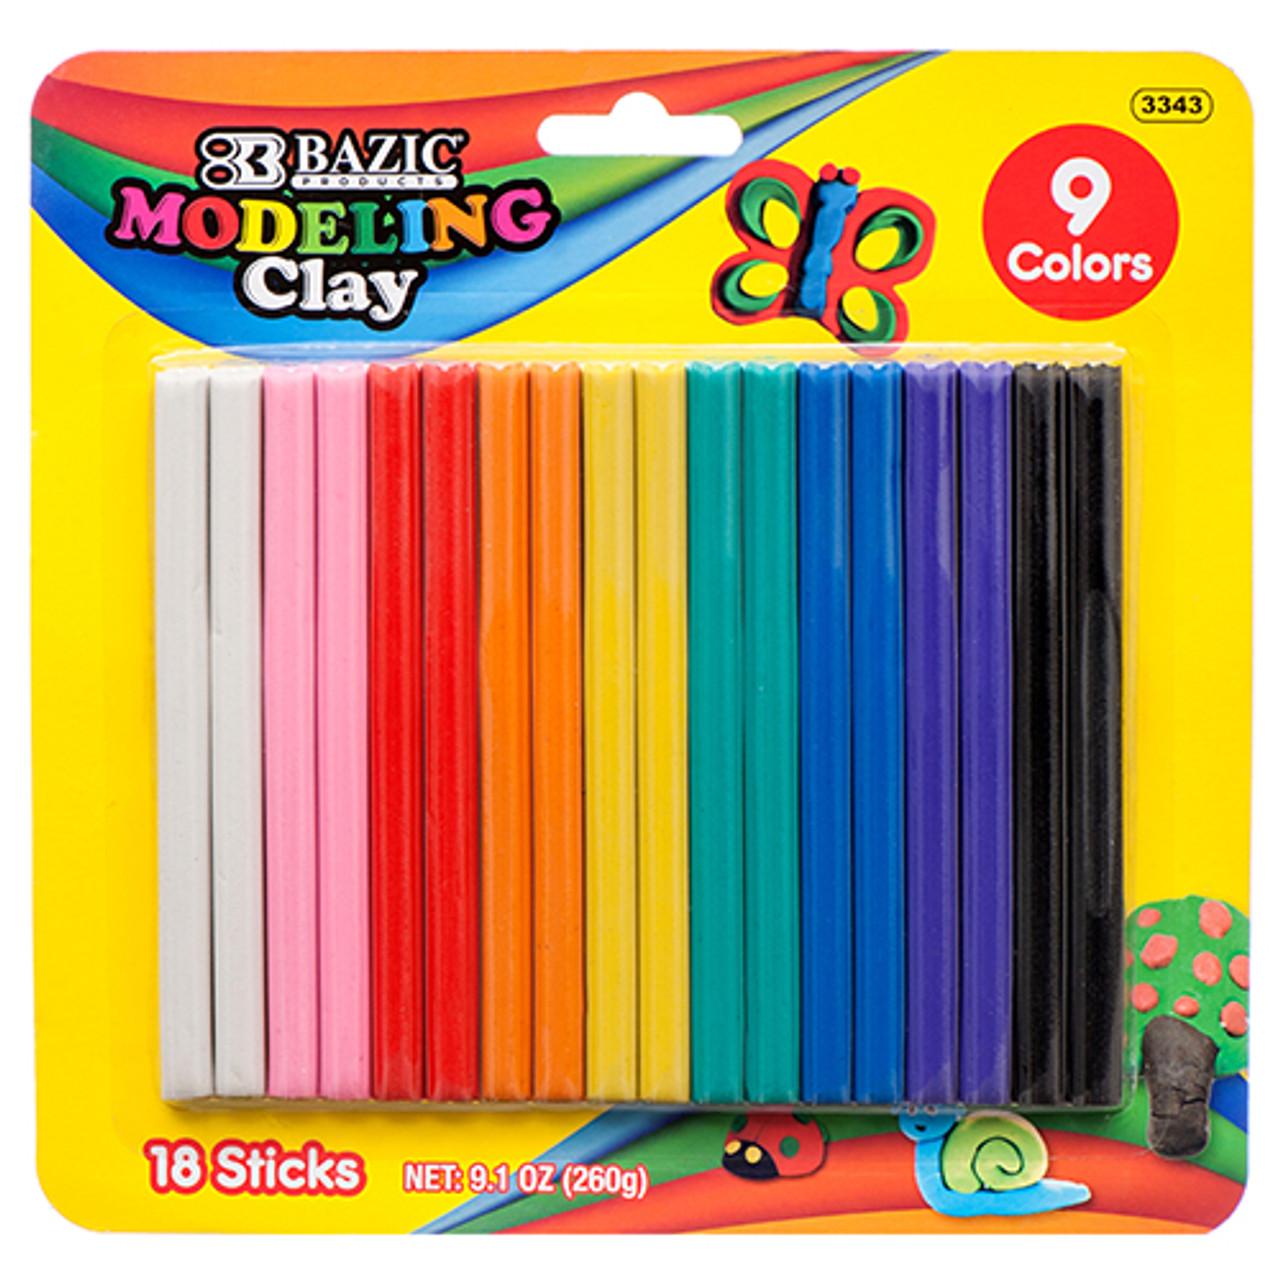 Bazic 1 lbs 4 Modeling Clay Sticks Fluorescent Color | 3321